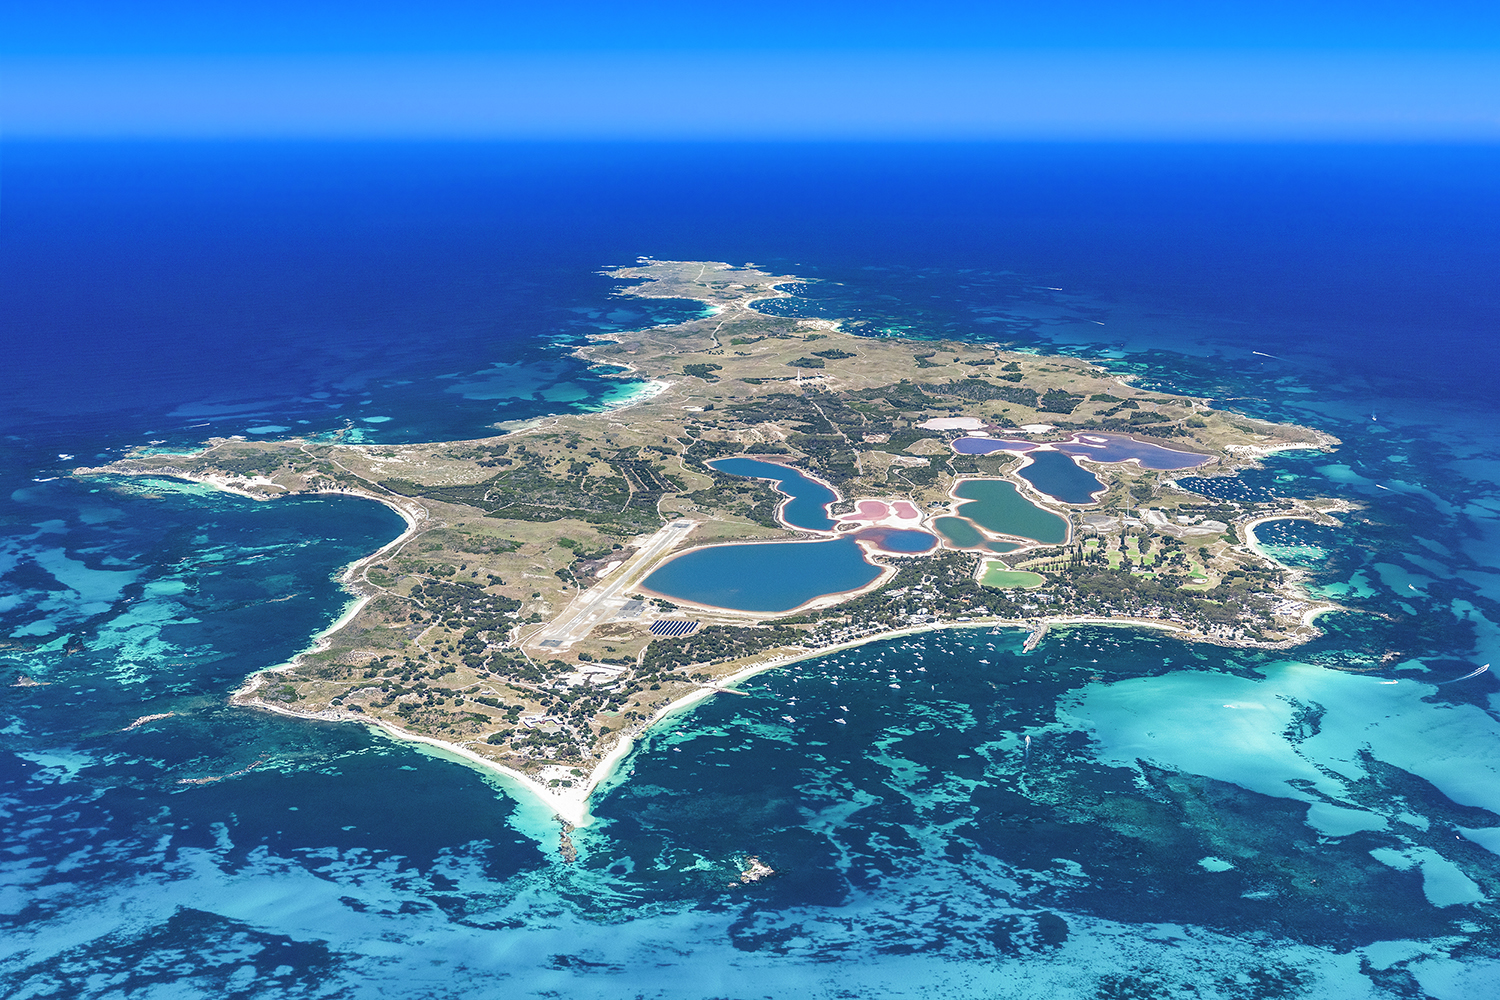 ROTTNEST ISLAND - THE ROCK from $255 AUD